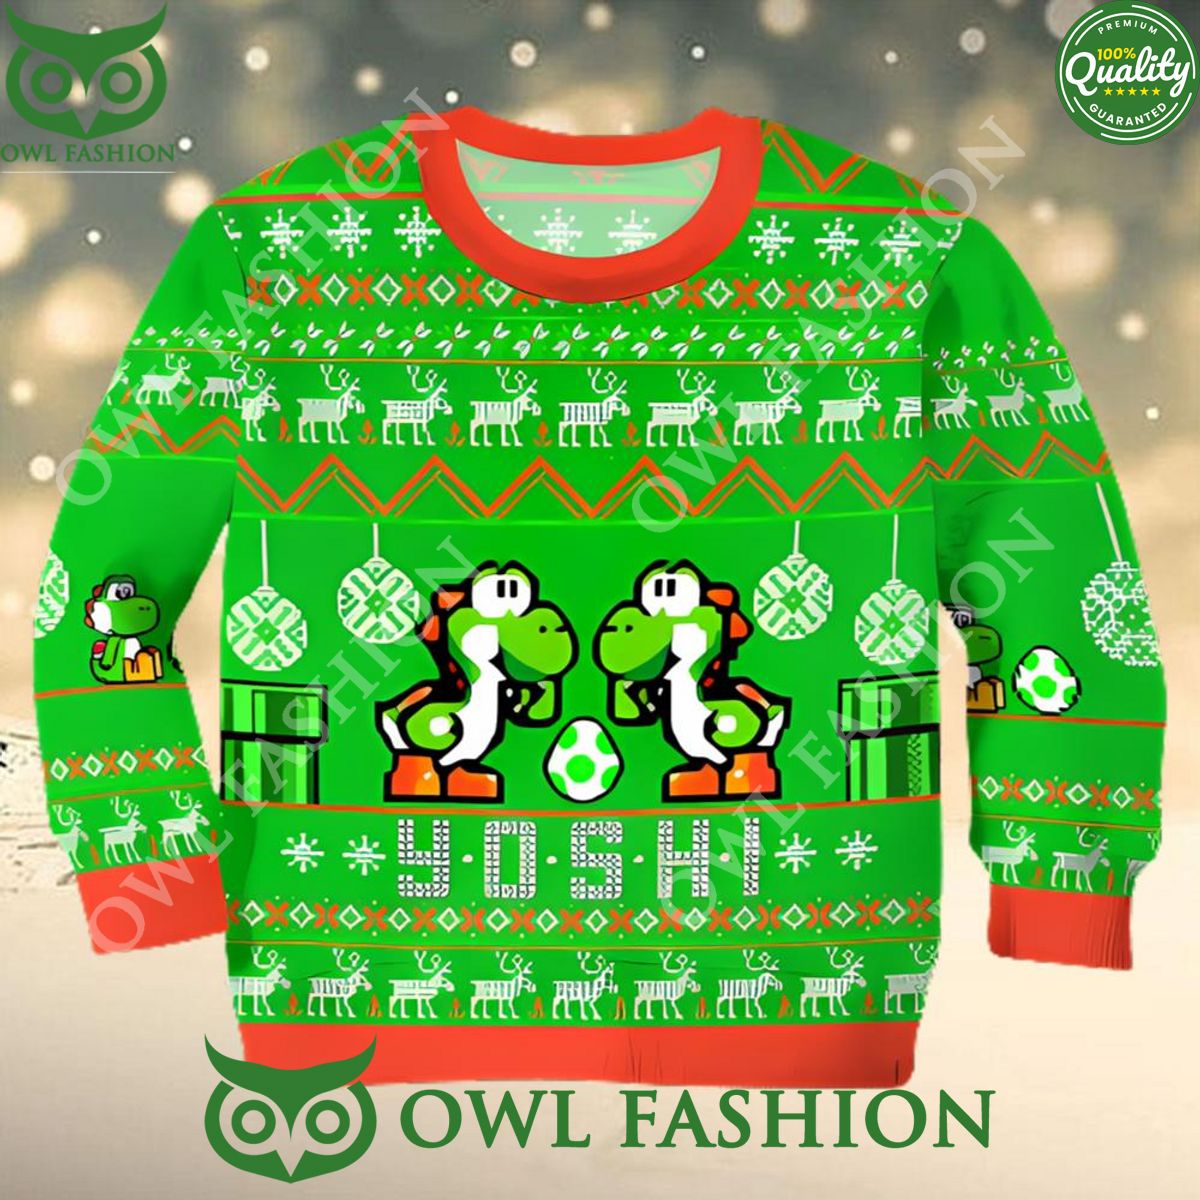 Super Mario Yoshi Custom Kid Ugly Sweater Jumper Best picture ever